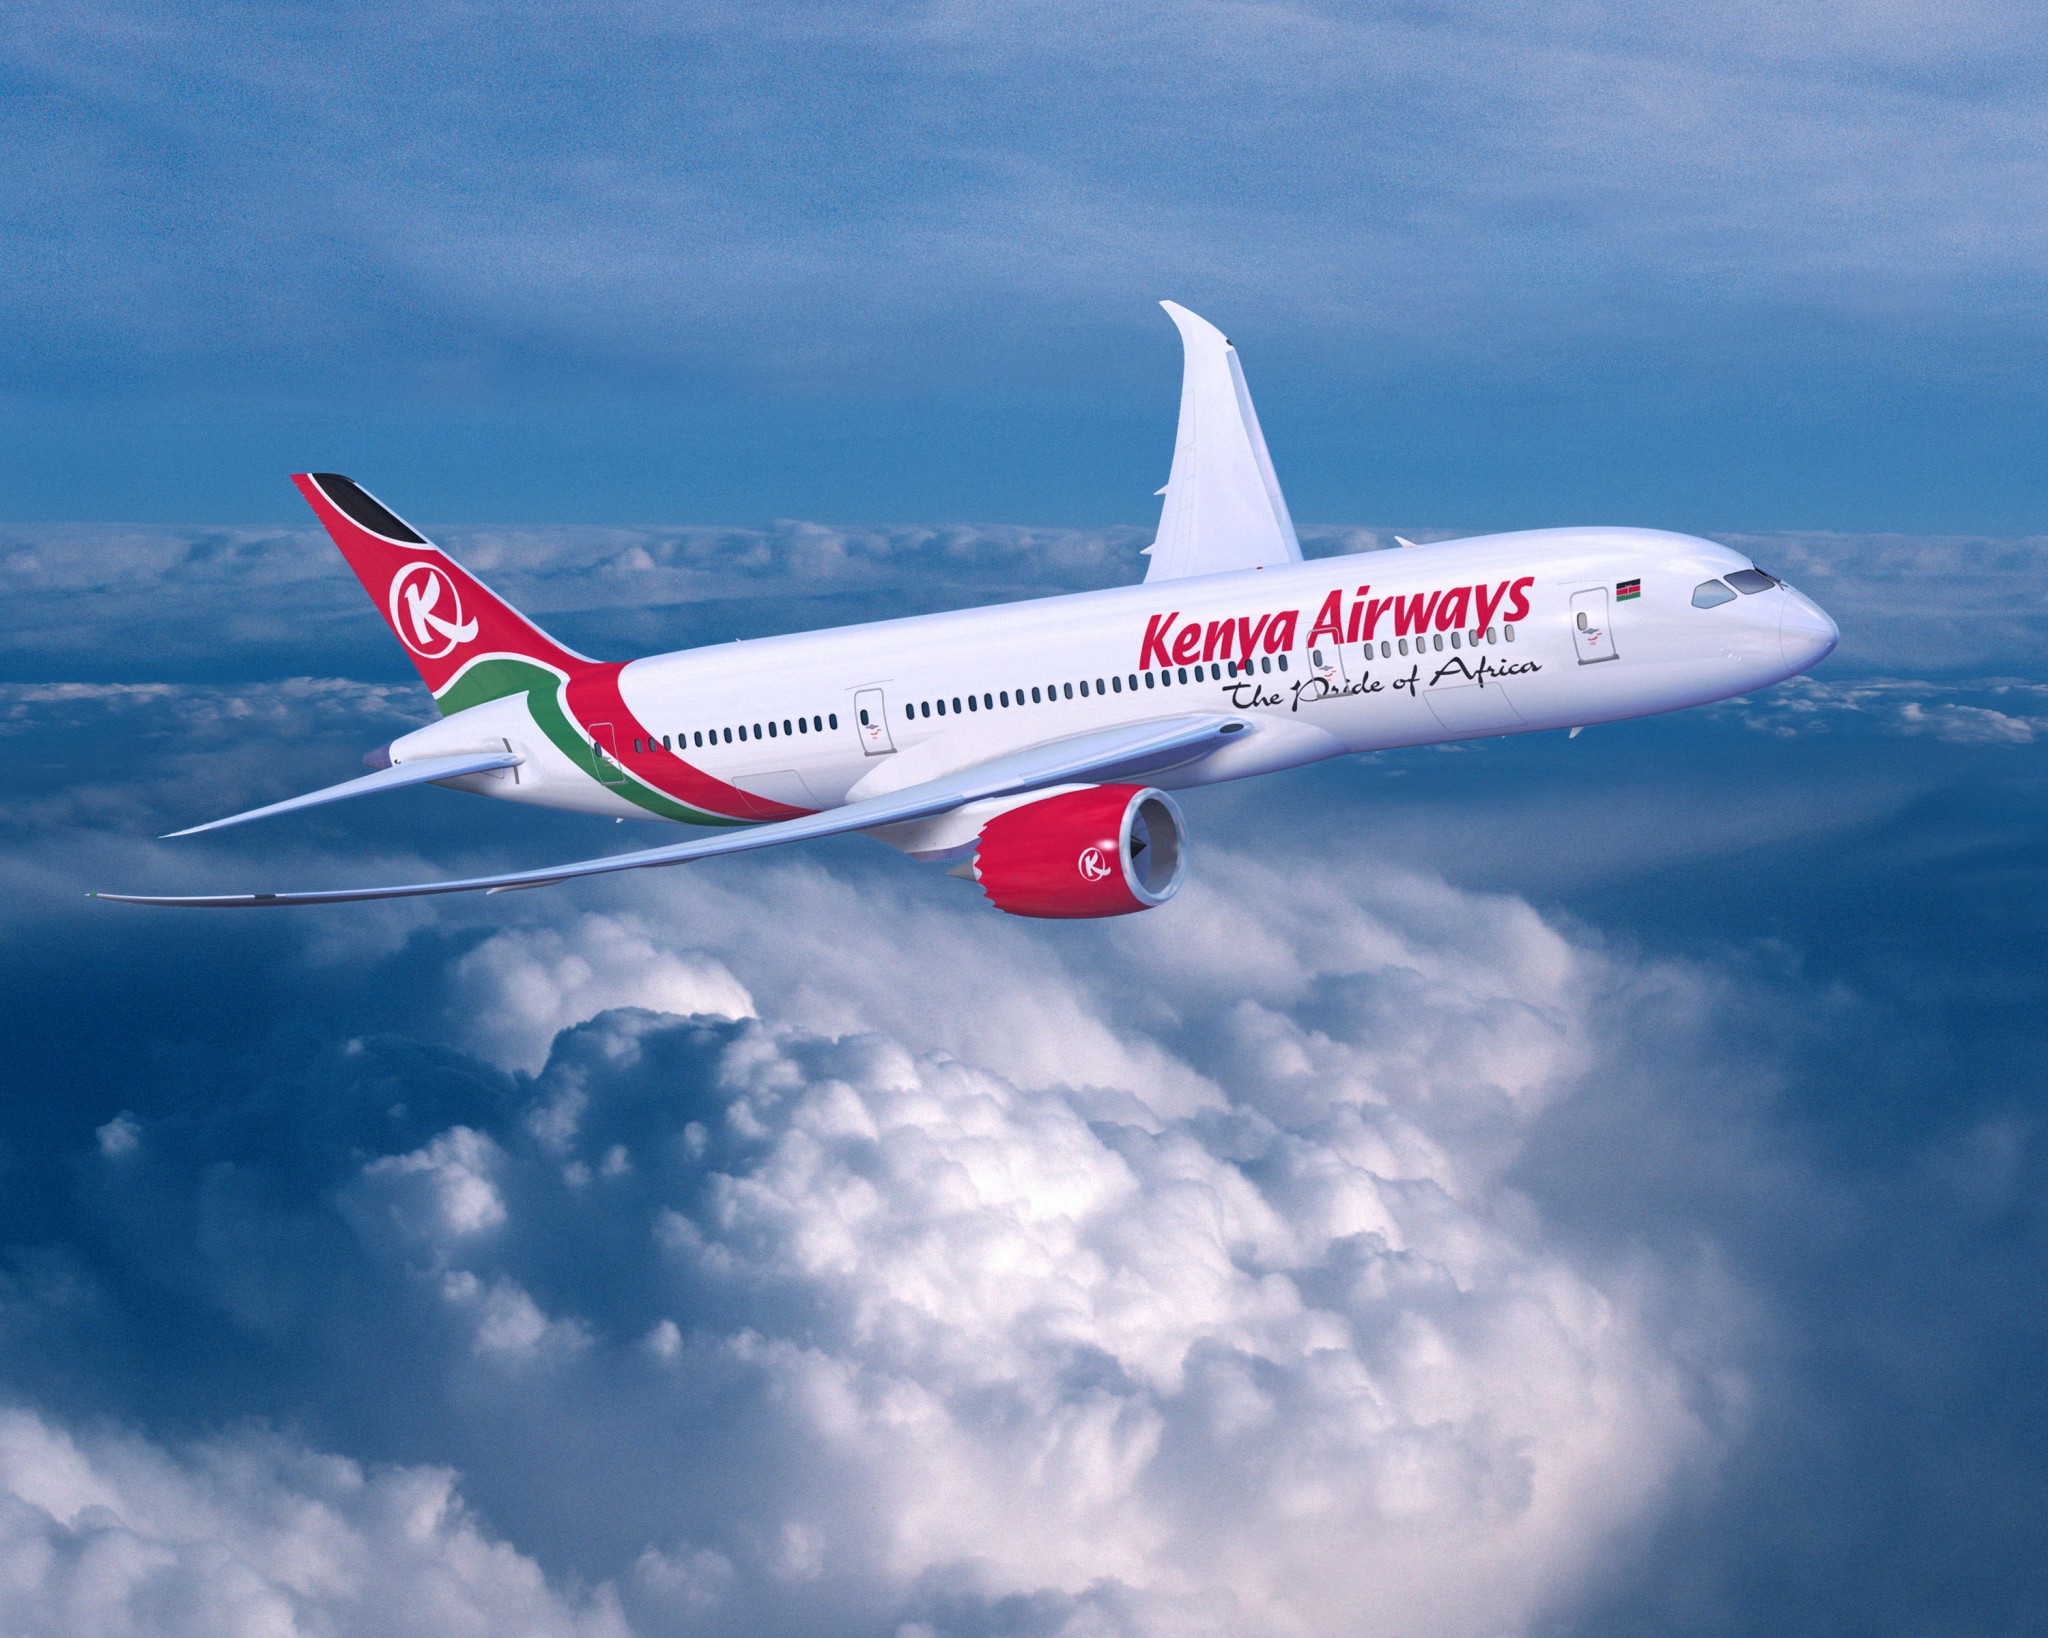 AFRAA – African carriers expect strong comeback in 2023